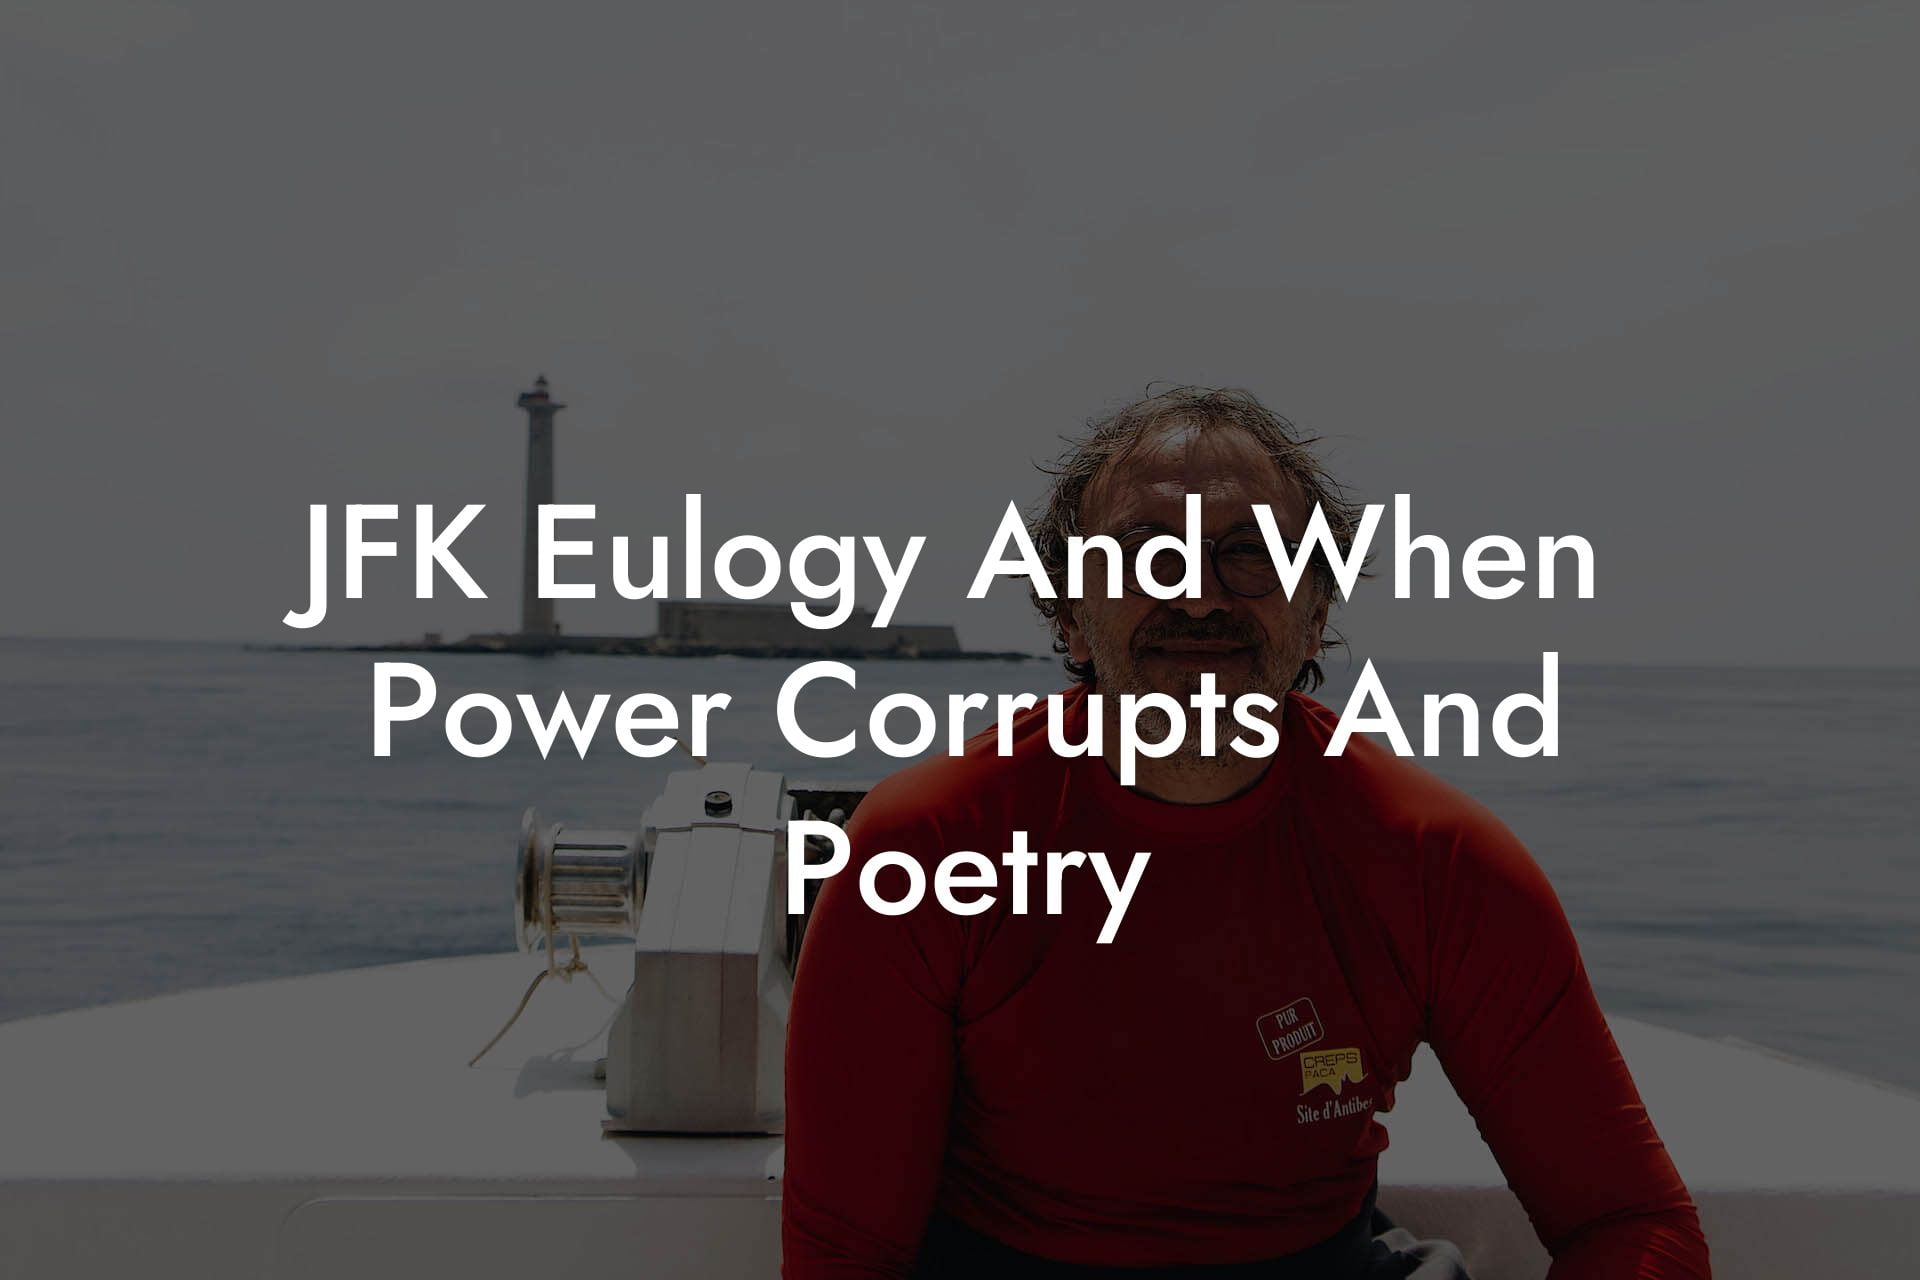 JFK Eulogy And When Power Corrupts And Poetry